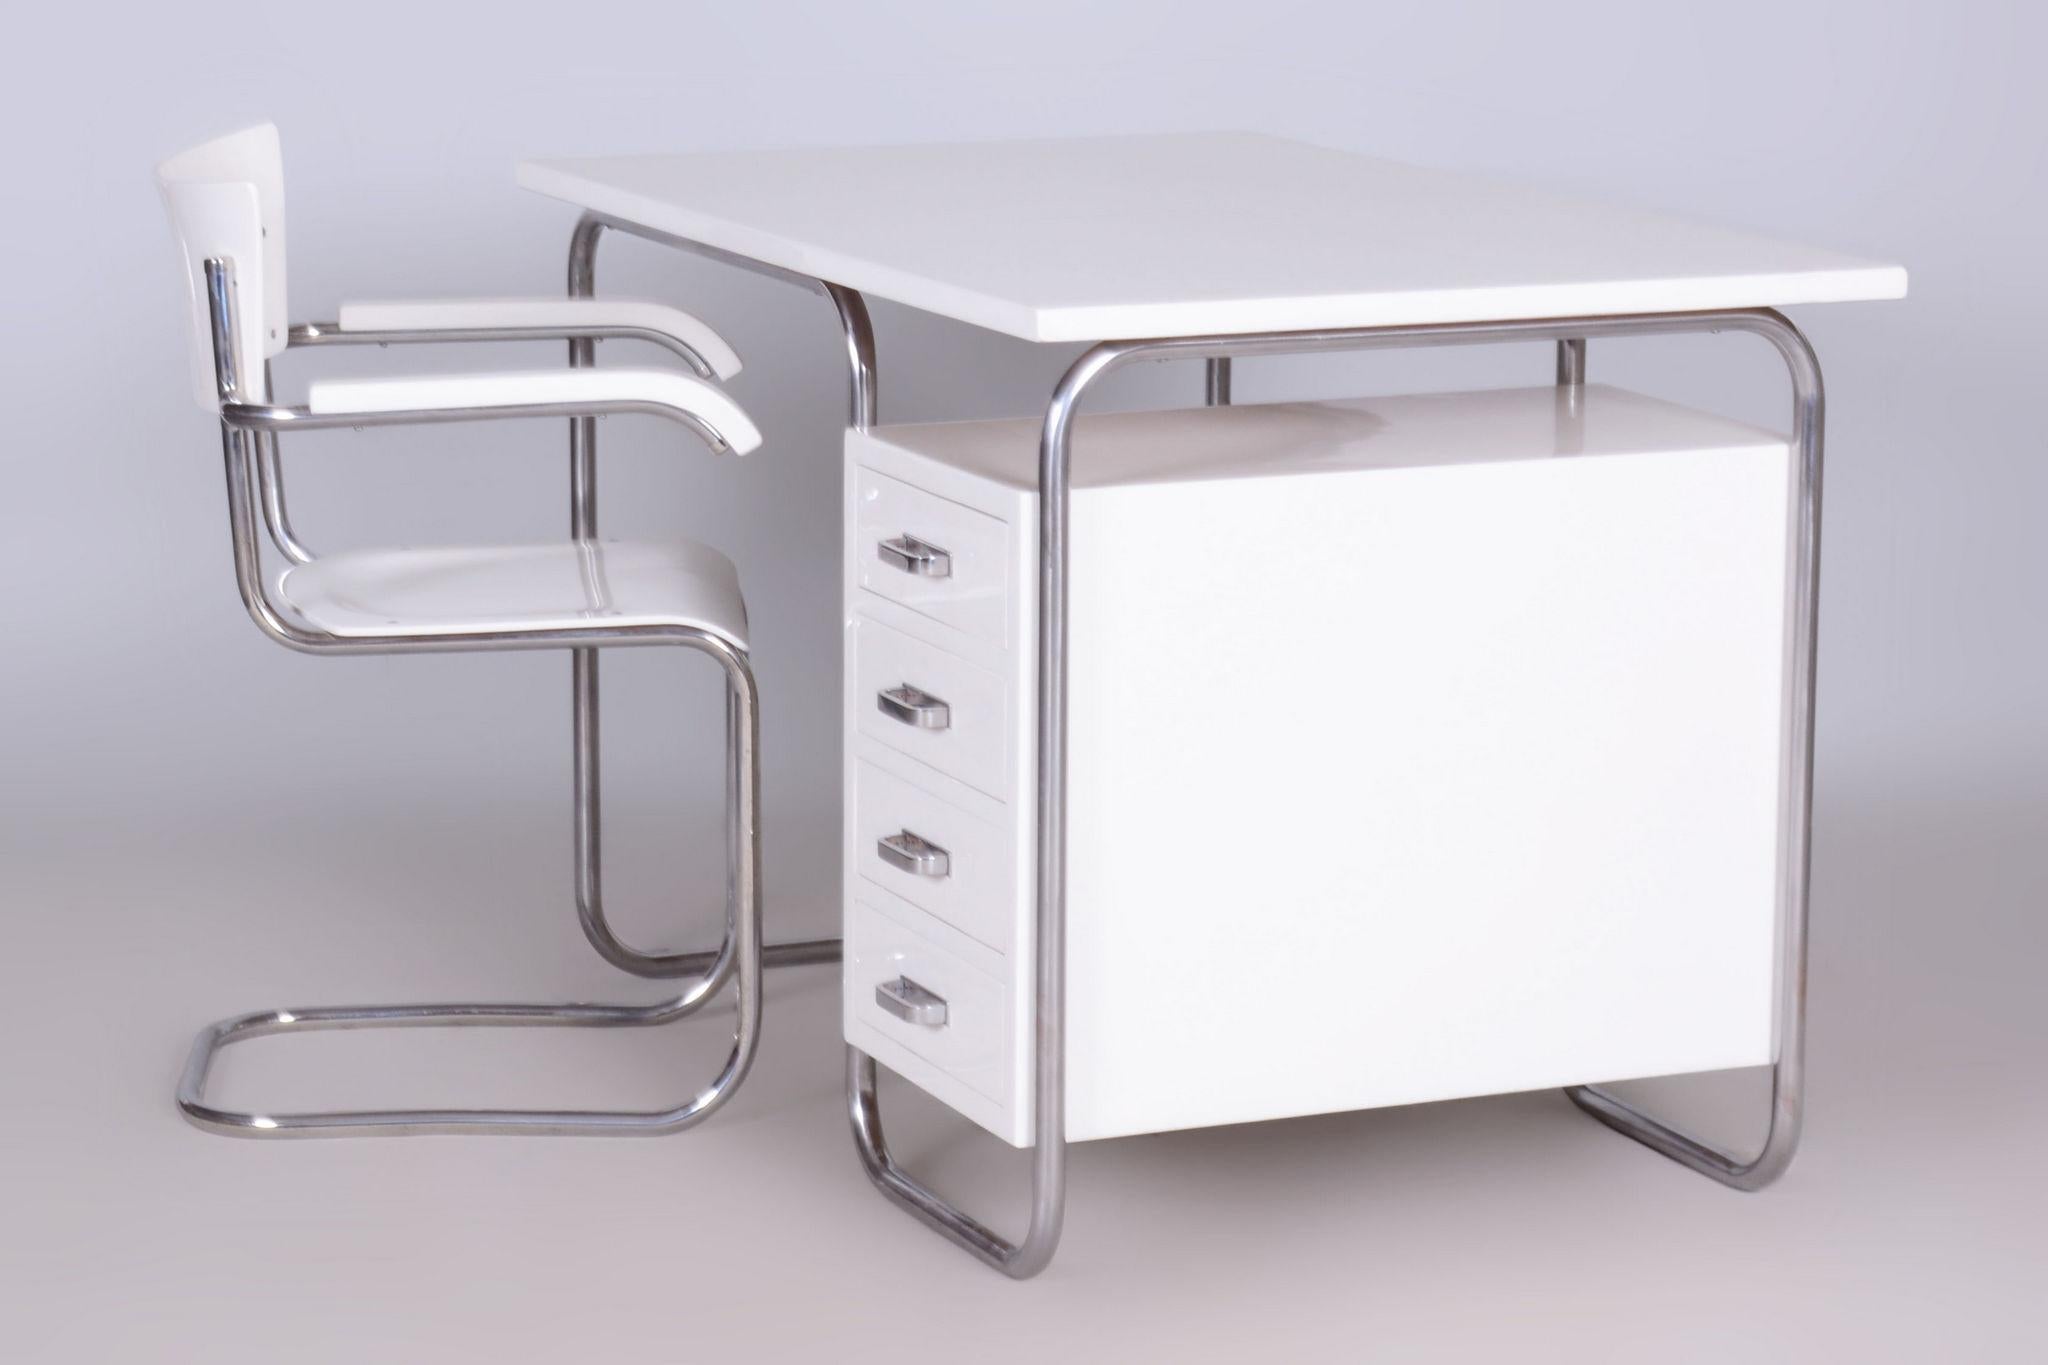 Restored Bauhaus Writing Desk With Chair, Chrome, Steel, Wood, Czech, 1930s For Sale 4